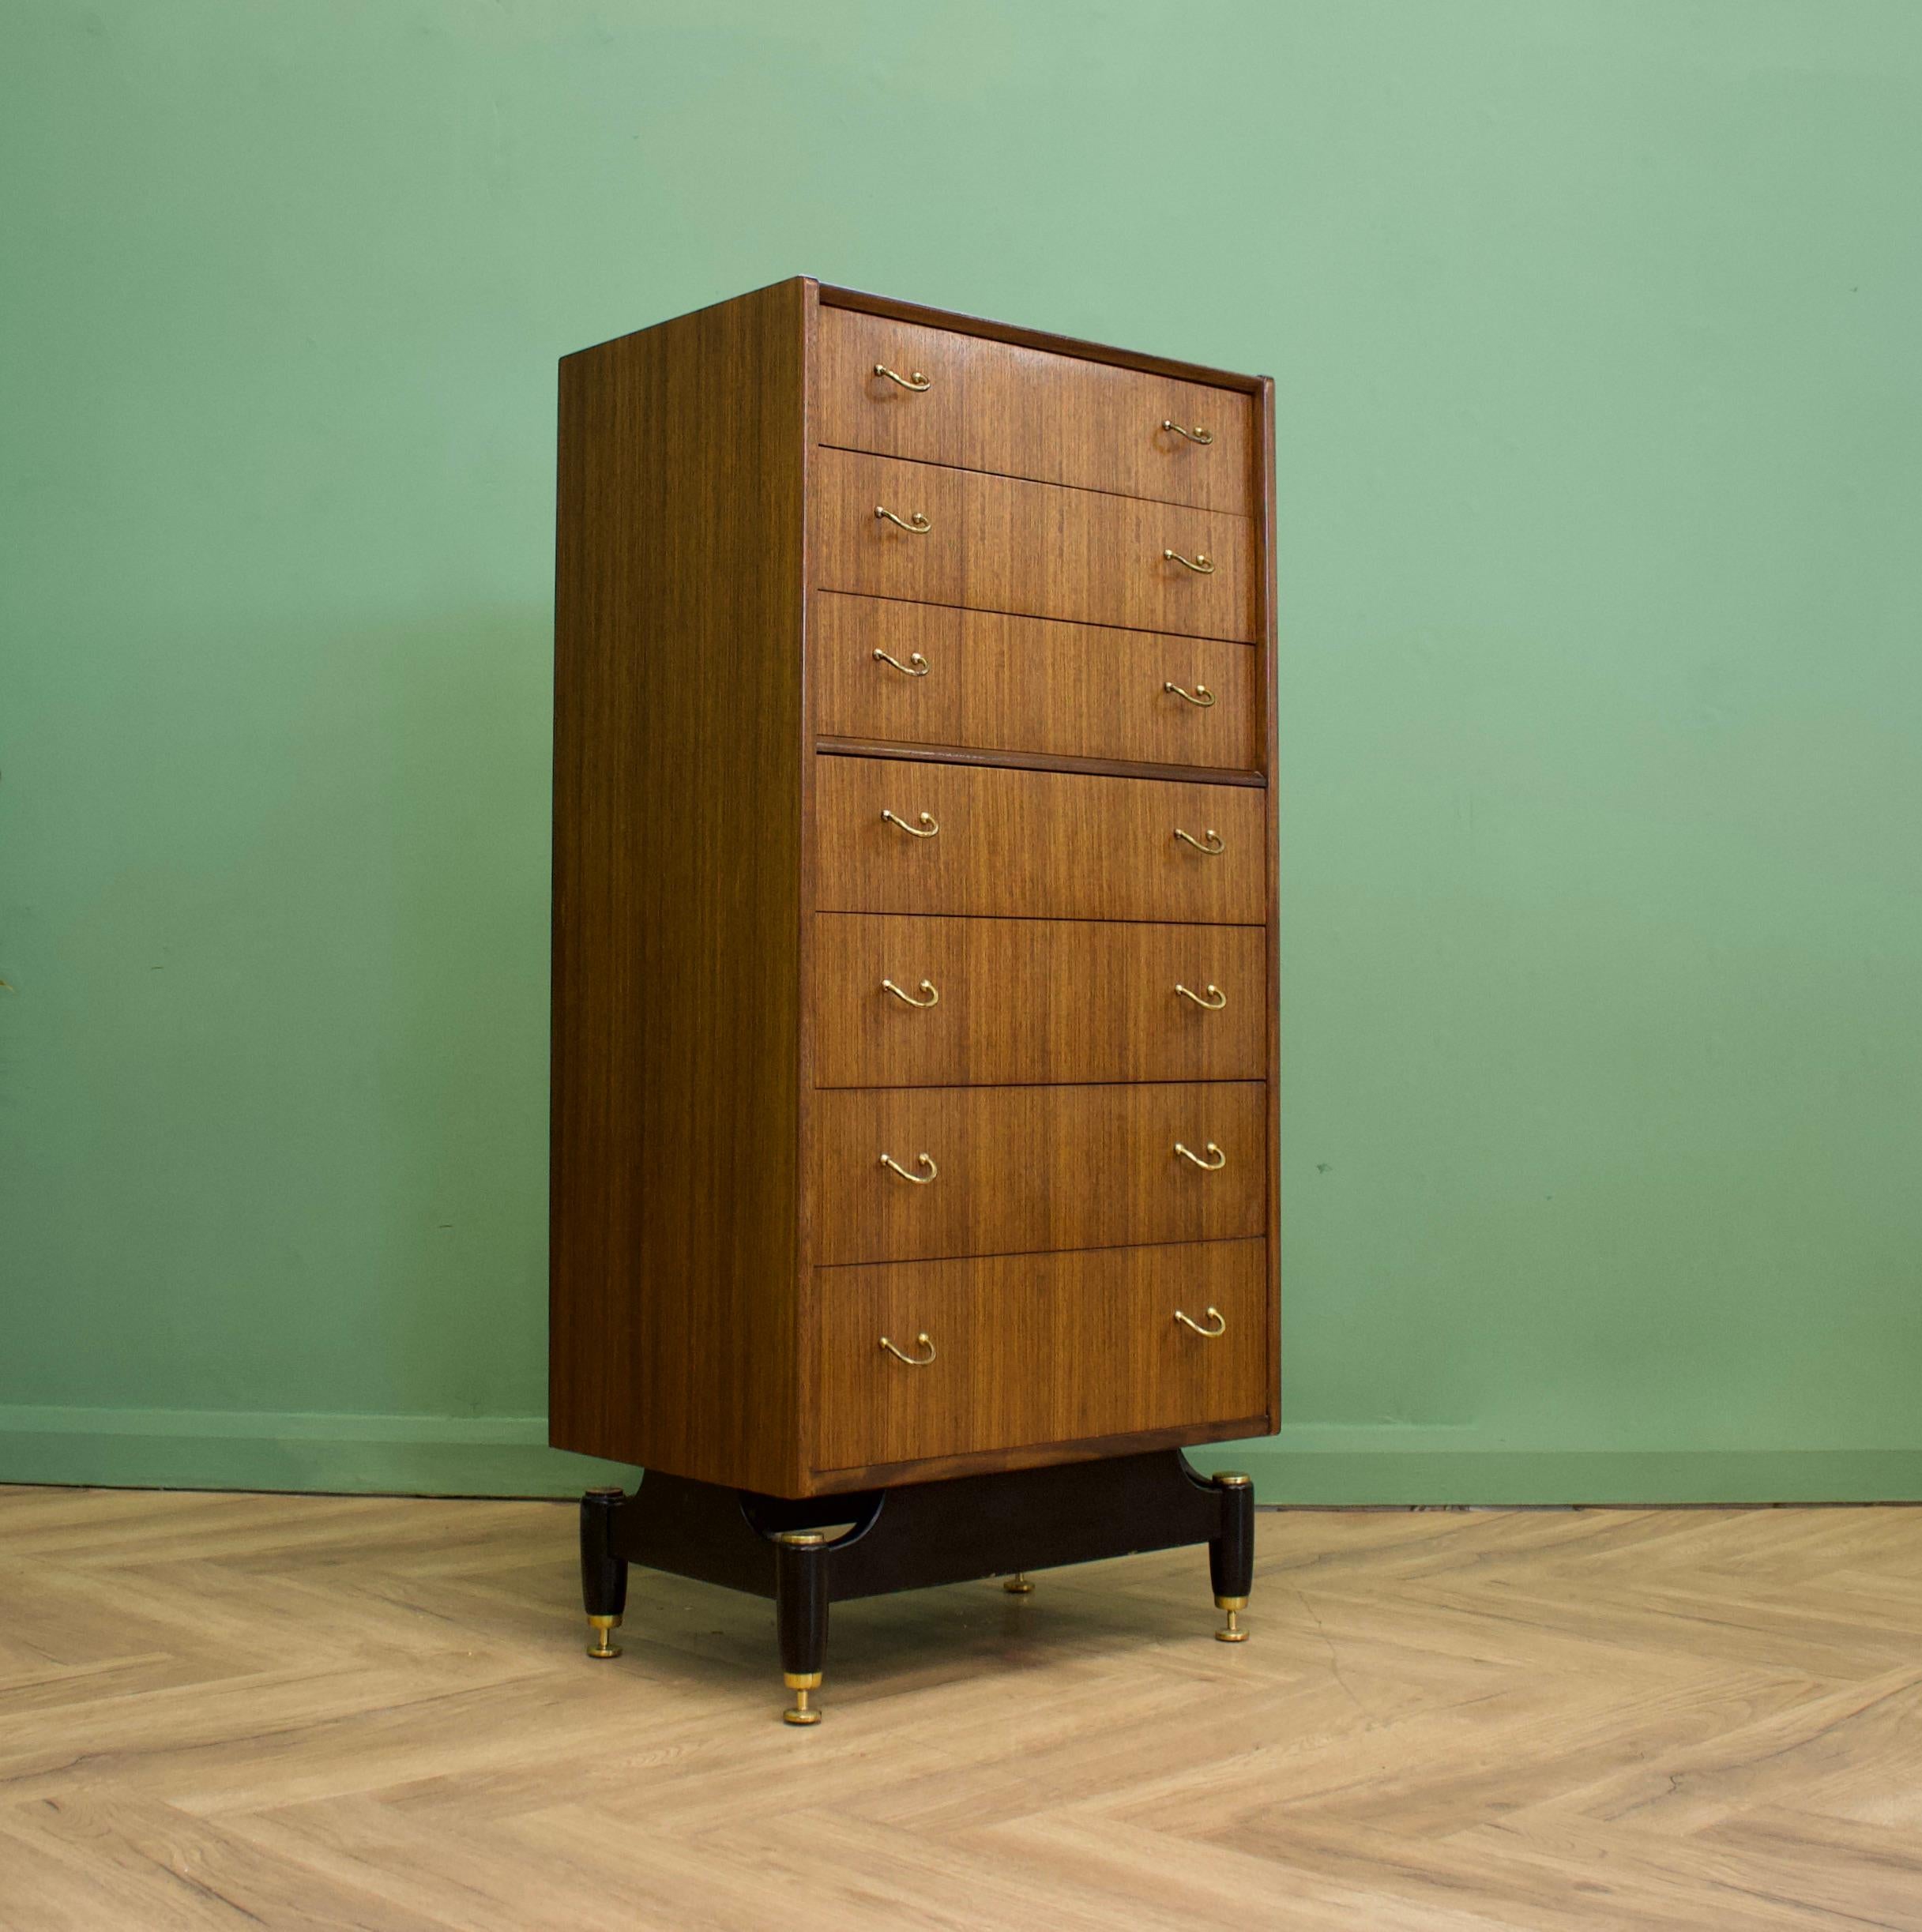 - Midcentury Tola wood tallboy chest of drawers
- Manufactured by G-Plan for the Librenza range
- Features 7 drawers.